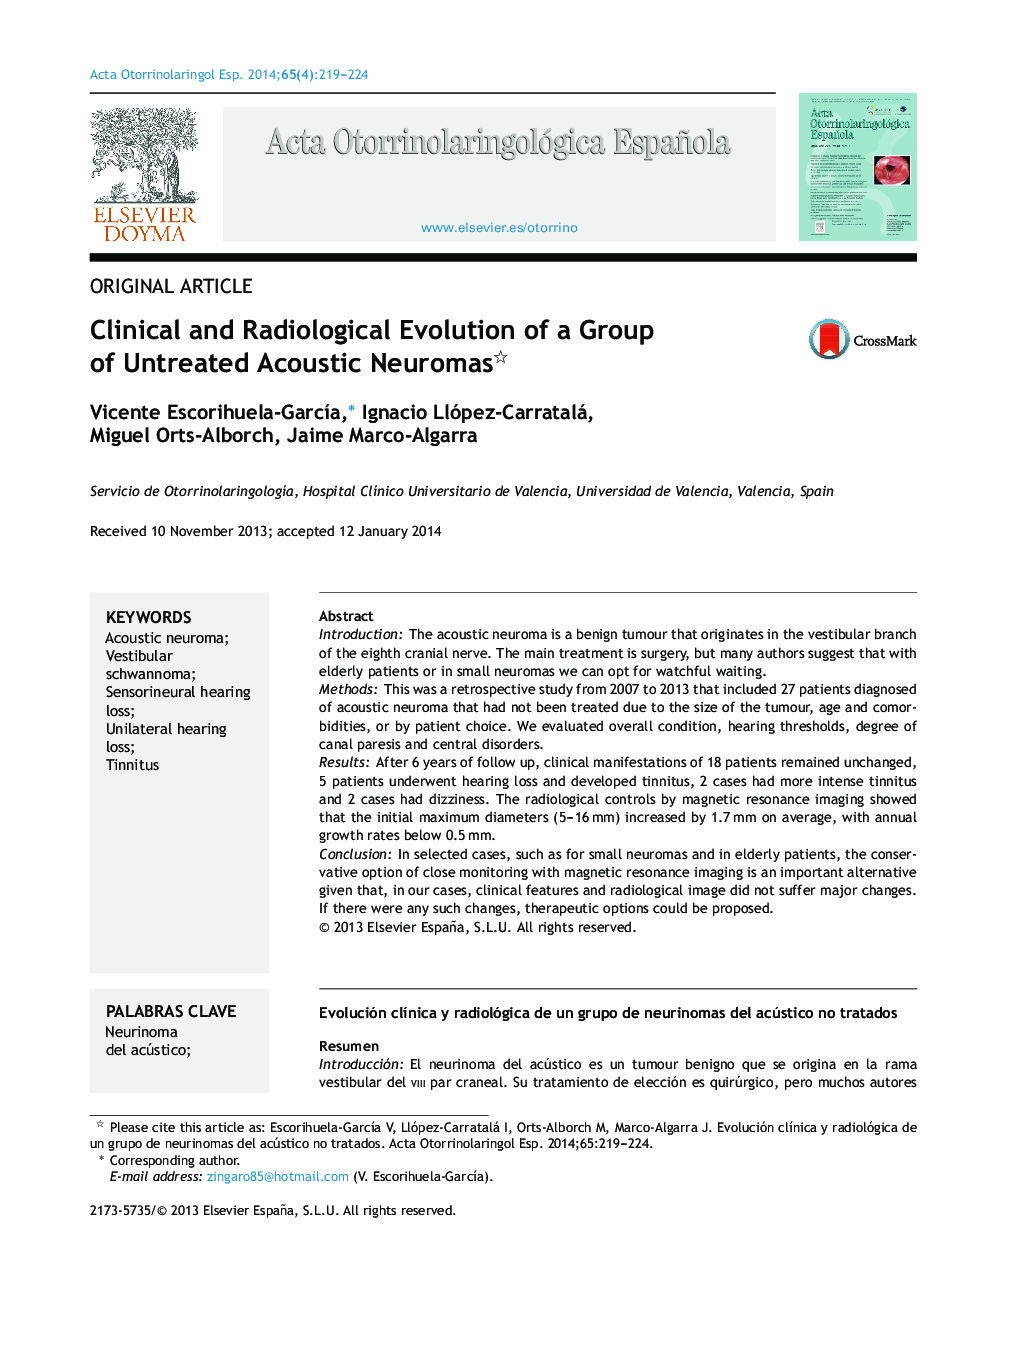 Clinical and Radiological Evolution of a Group of Untreated Acoustic Neuromas 